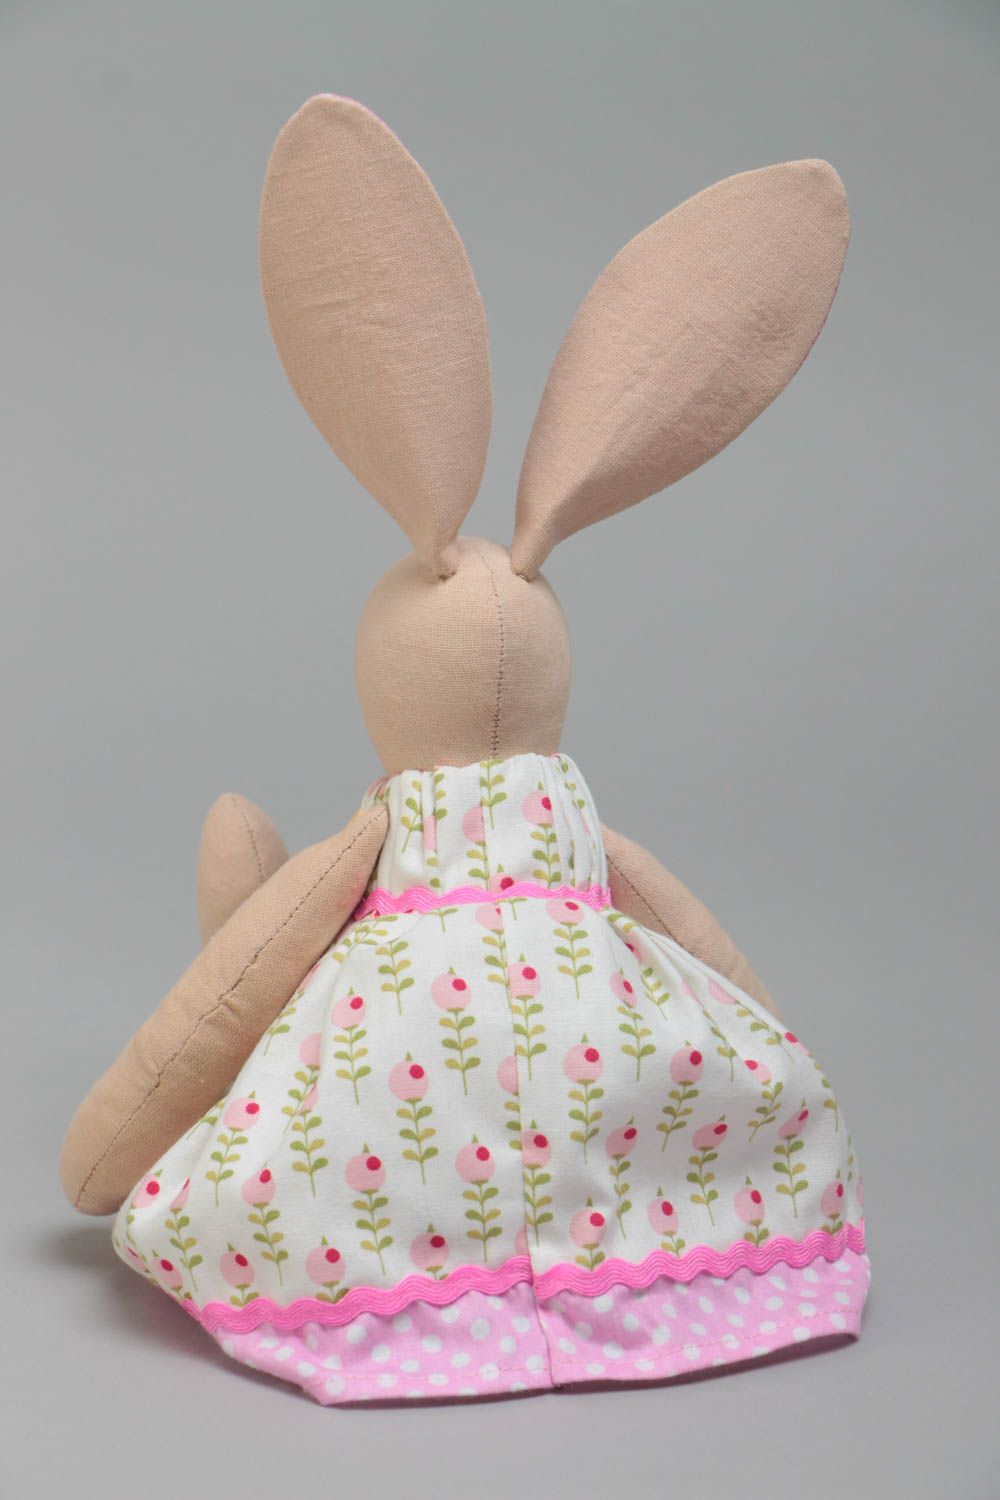 Handmade cotton fabric soft toy rabbit in floral dress with pink polka dot ears photo 4